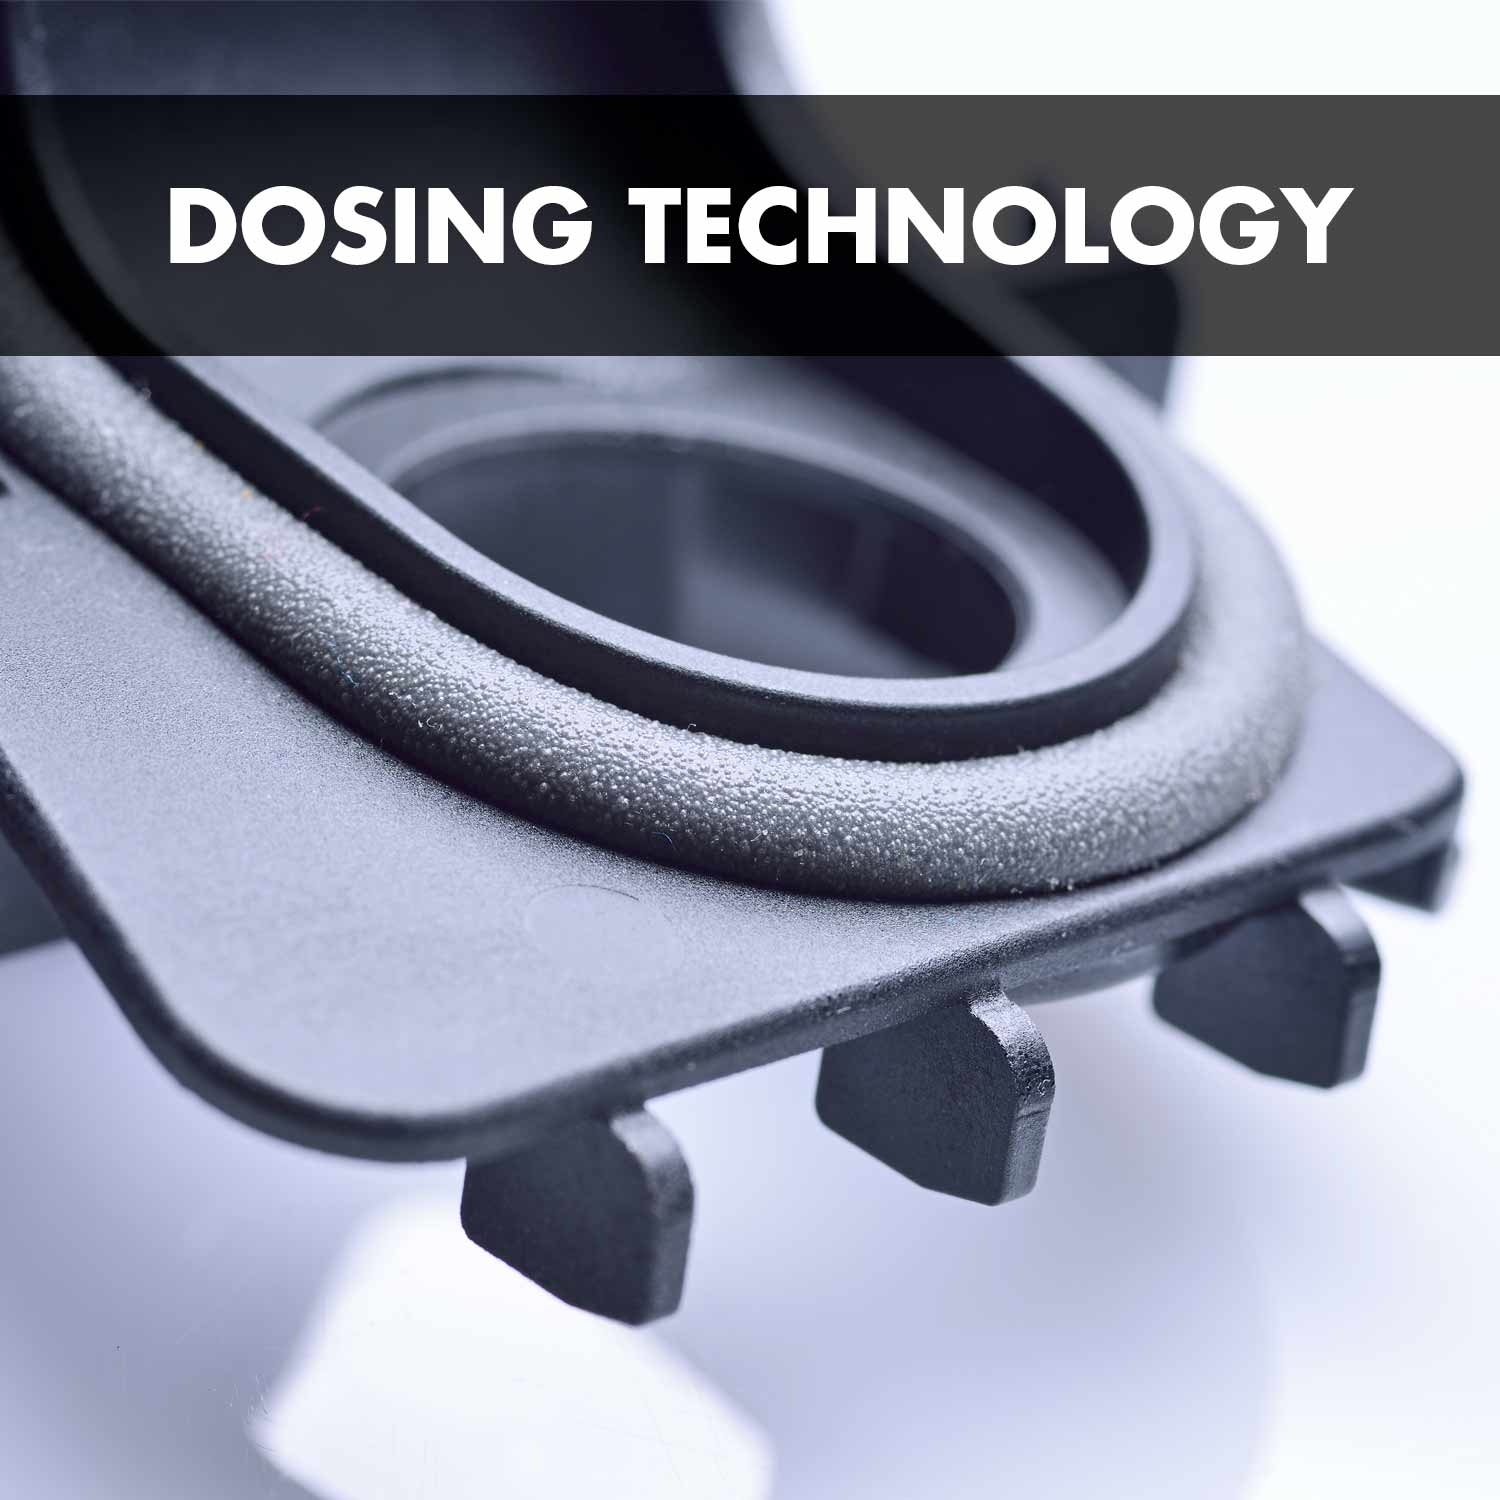 Dosing technology: Dosing of sealants directly onto components precisely matching the contour.